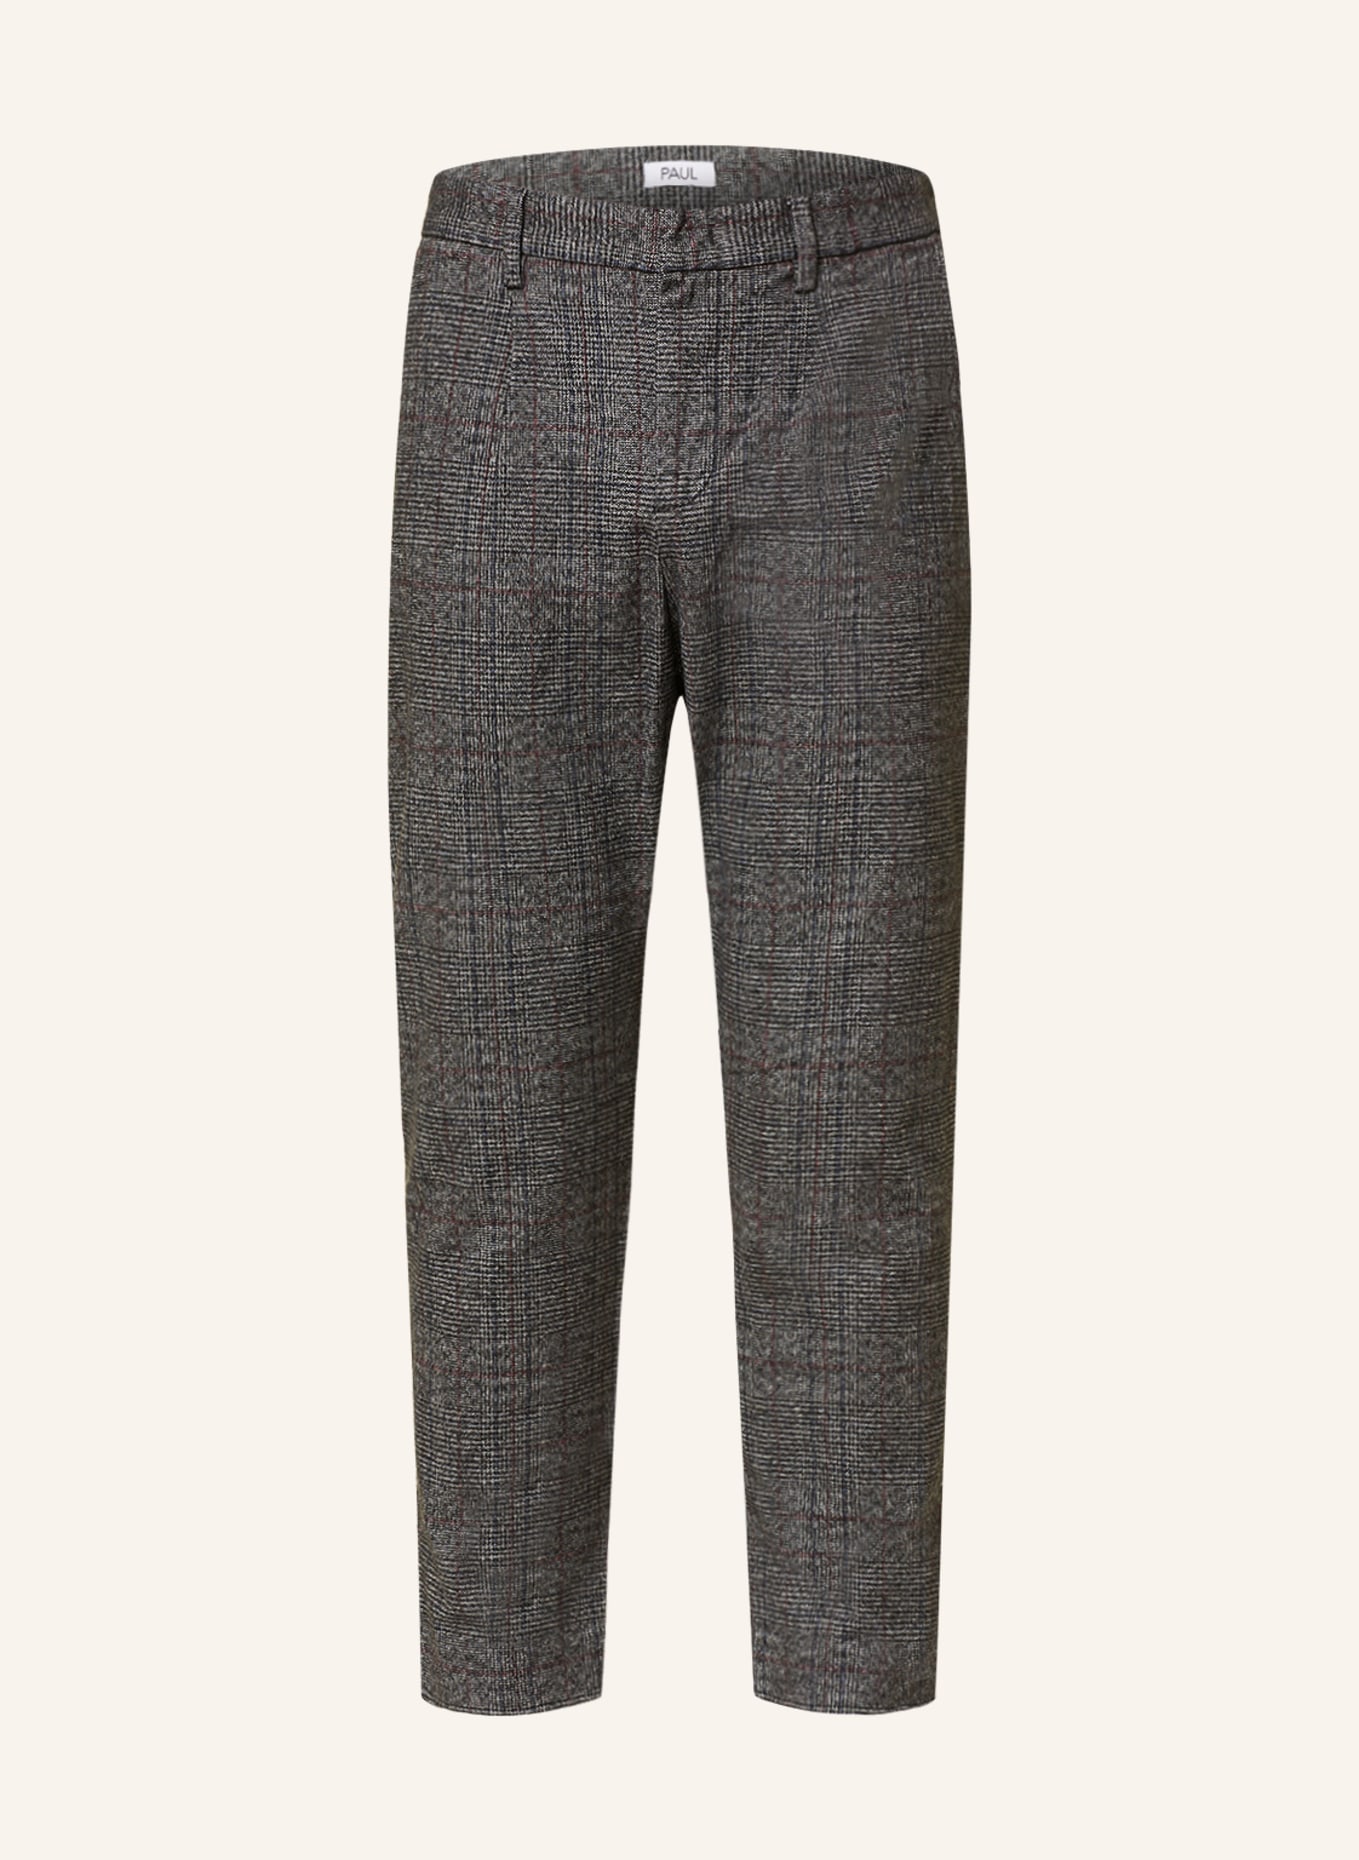 PAUL Chinos tapered fit, Color: GRAY/ DARK BLUE/ DARK RED (Image 1)